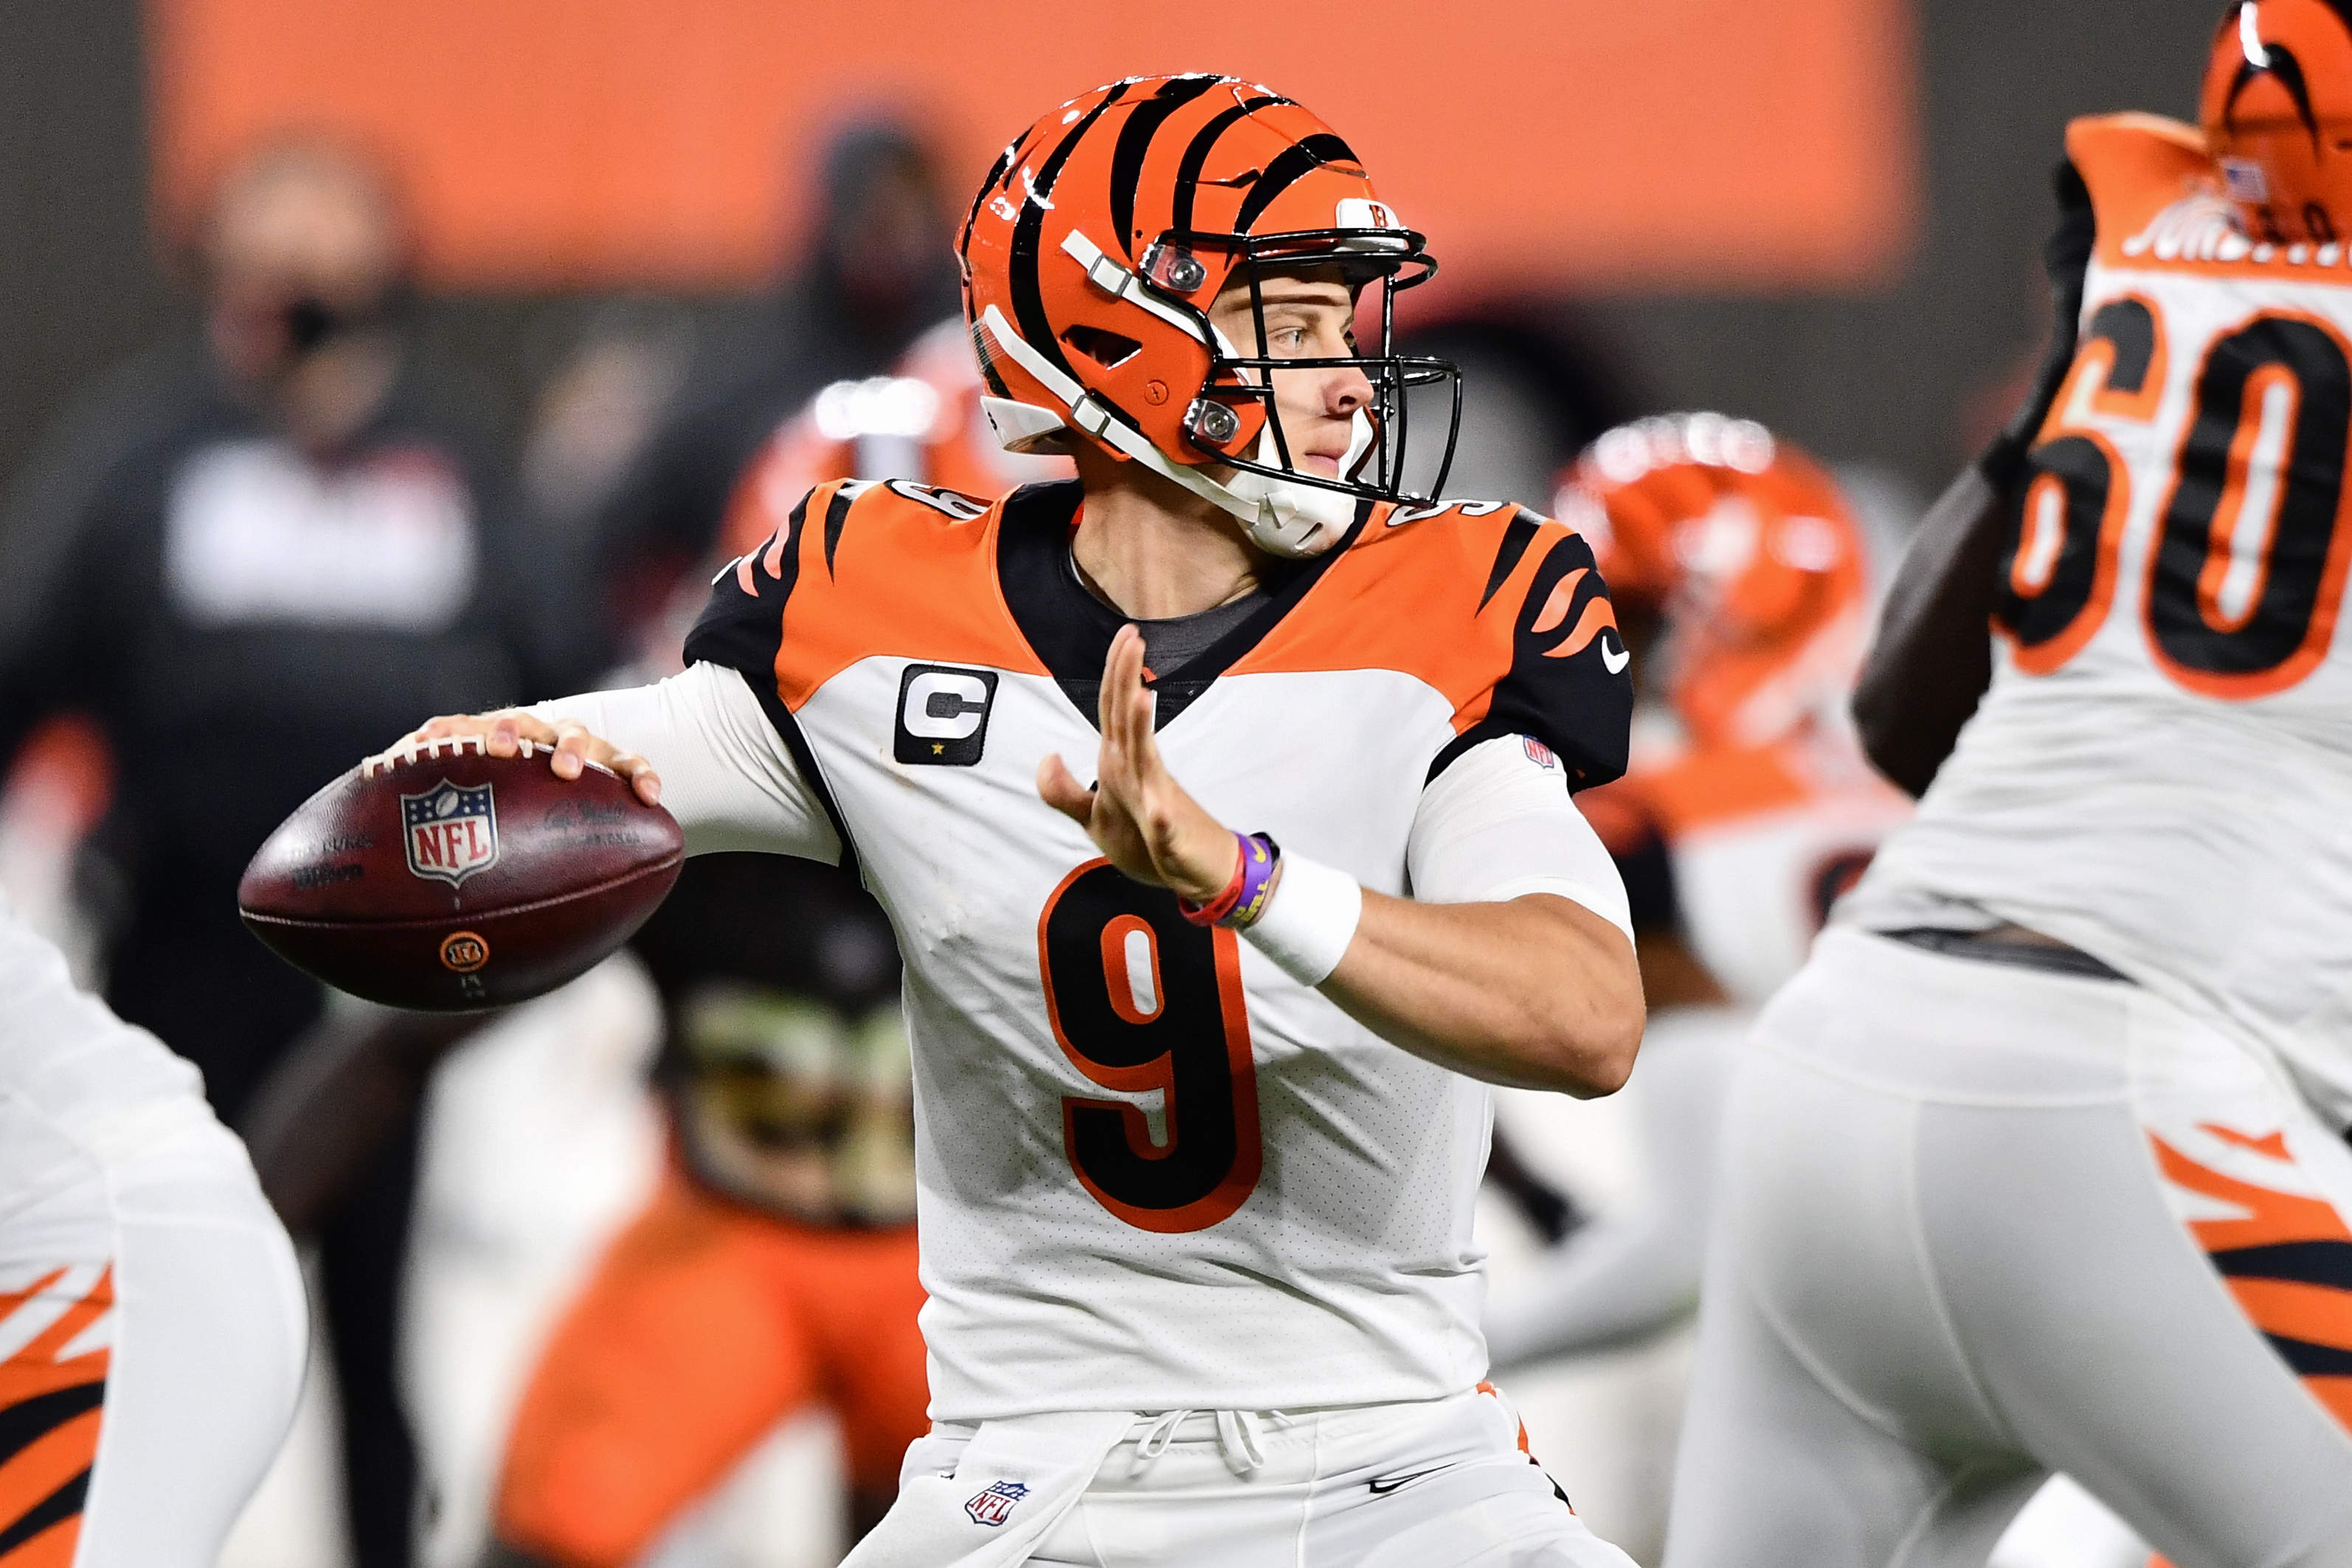 Joe Burrow Sets New NFL Records as Bengals Lose to Browns on Thursday Night Football